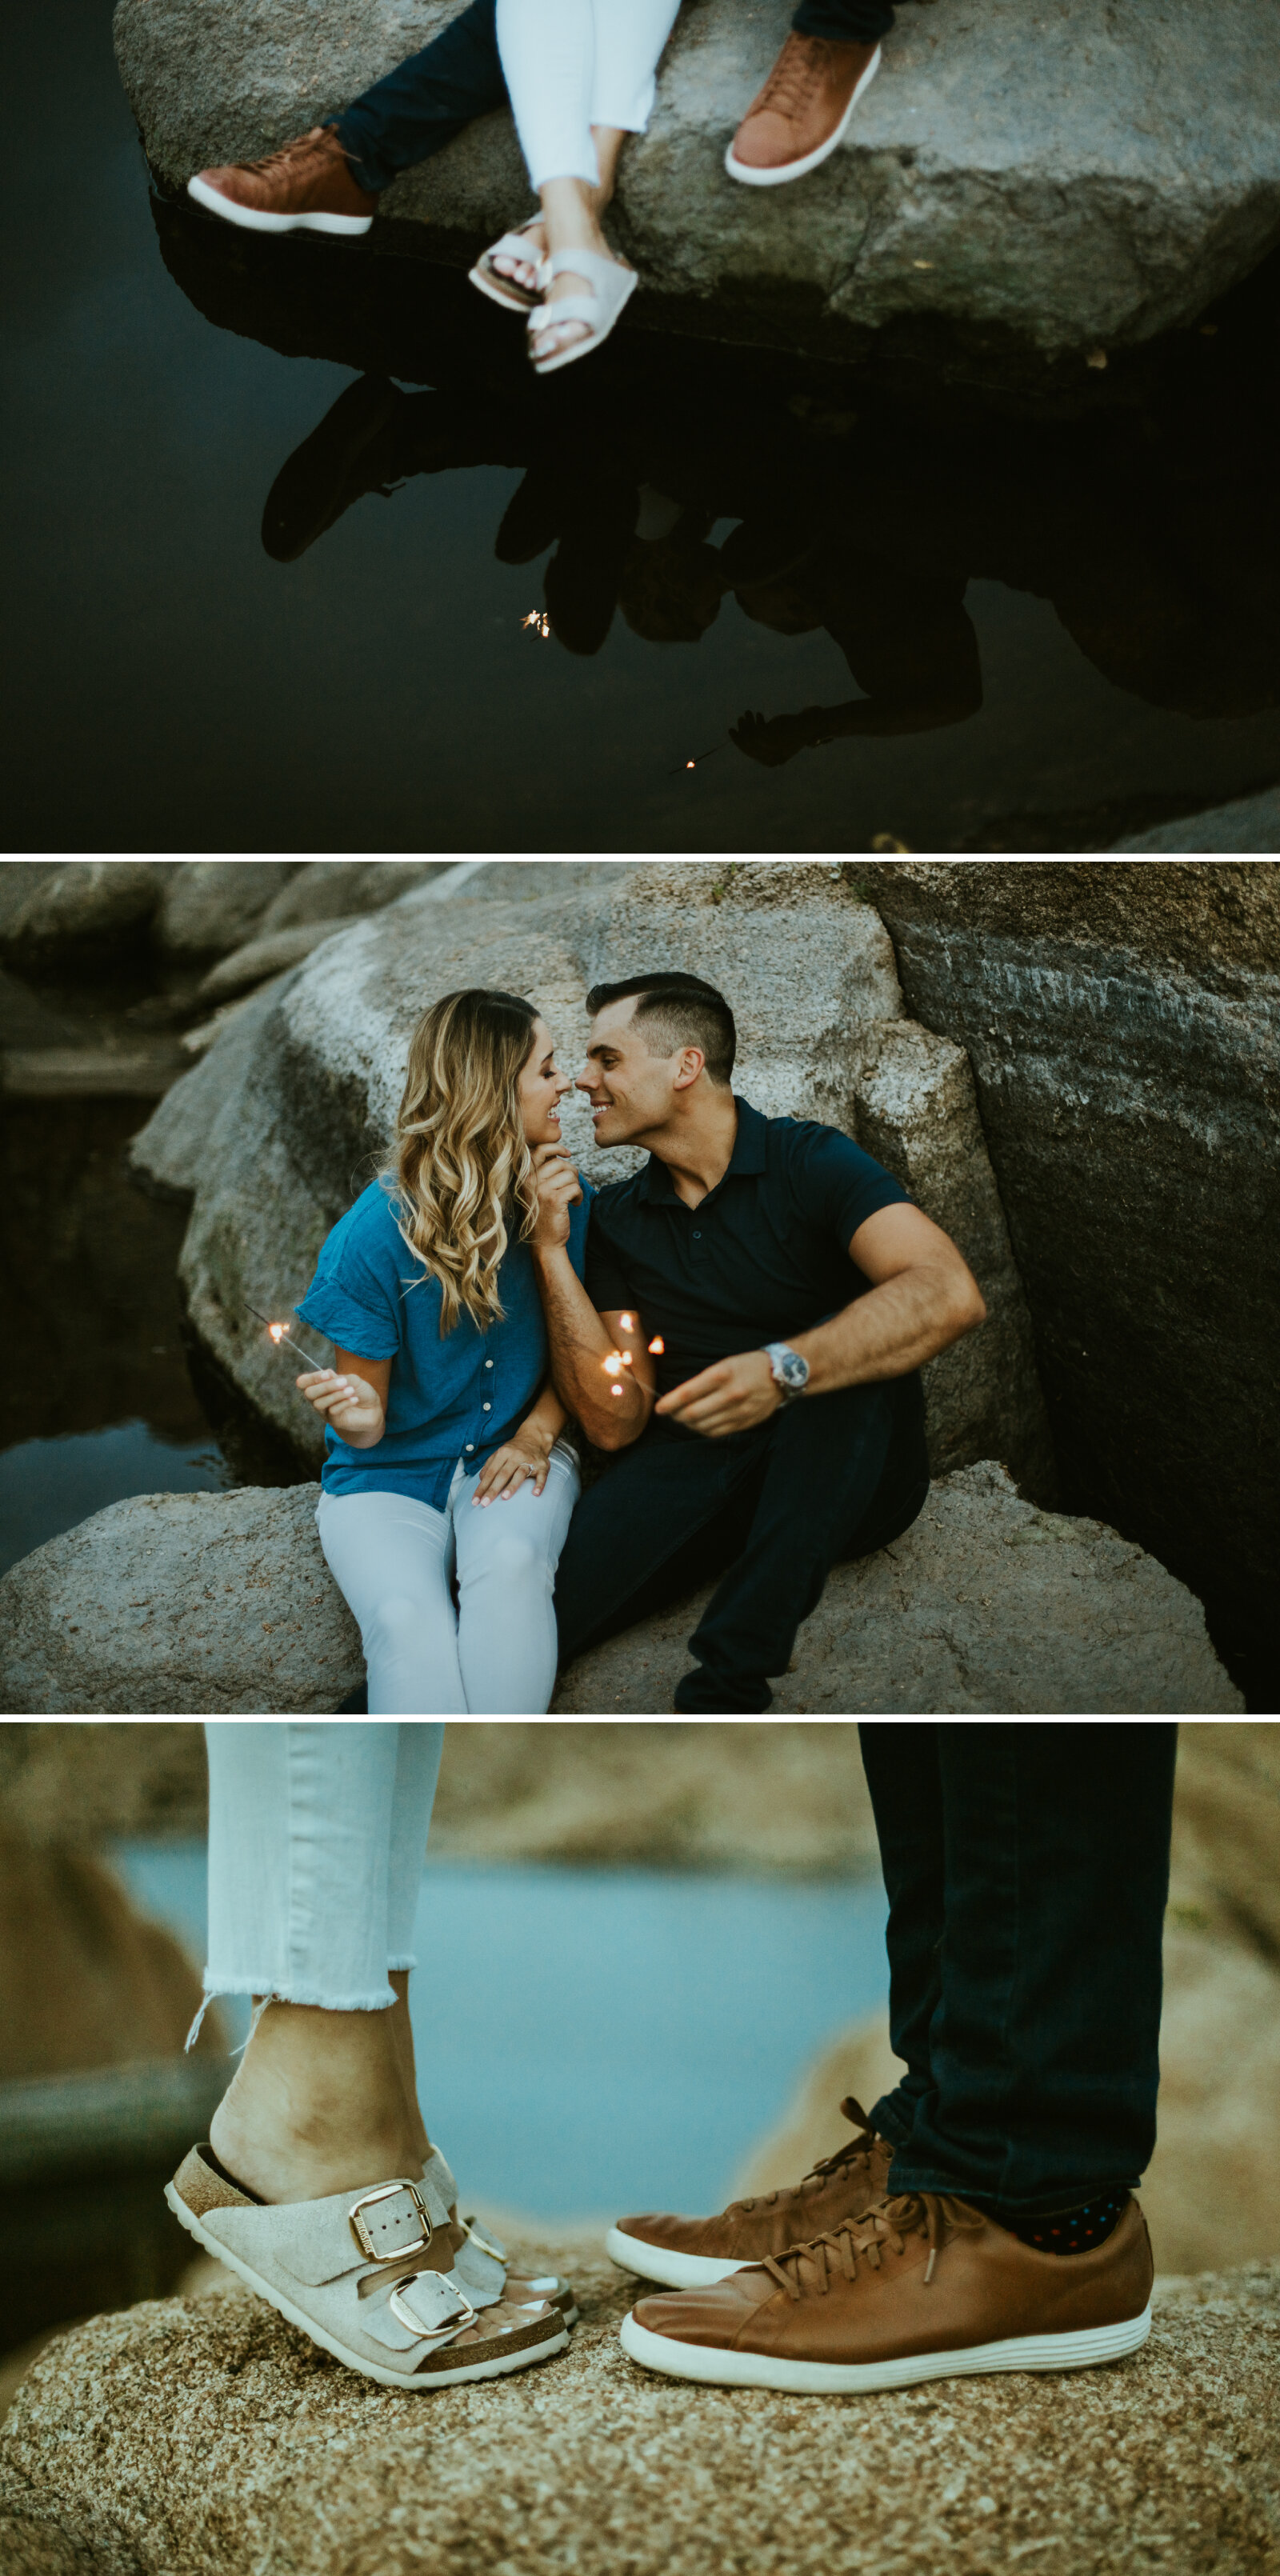 prescott arizona engagement photos watson lake couple outfit inspiration color pallete outfit ideas casual couple clothing engagement posing ideas sparklers fourth of july photos.jpg